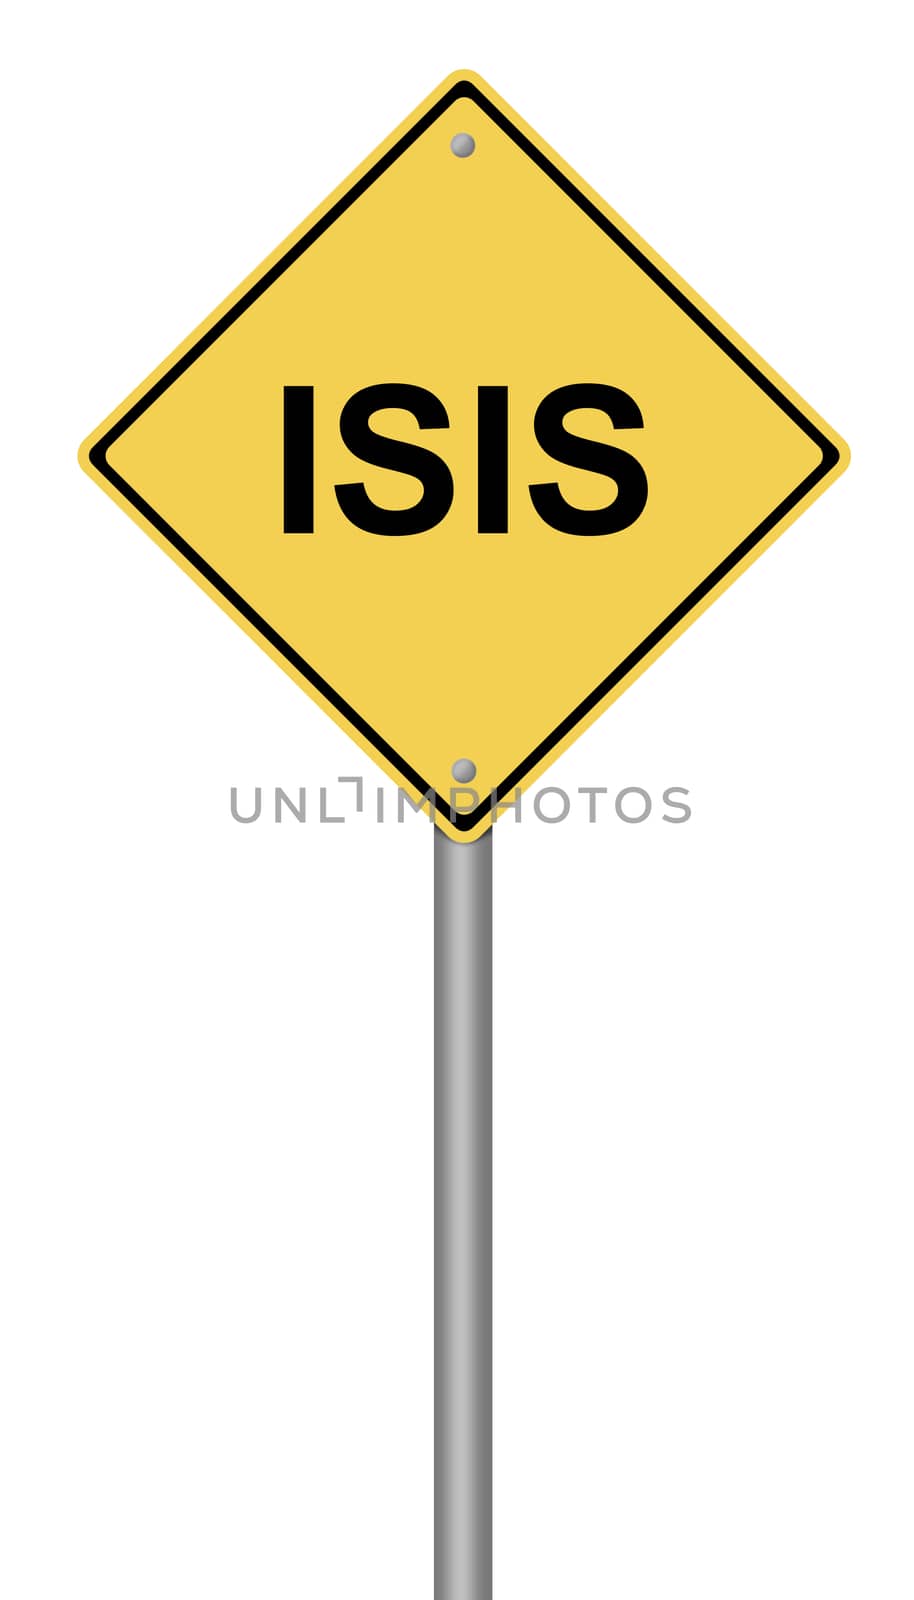 Yellow warning sign with the text ISIS on white background.